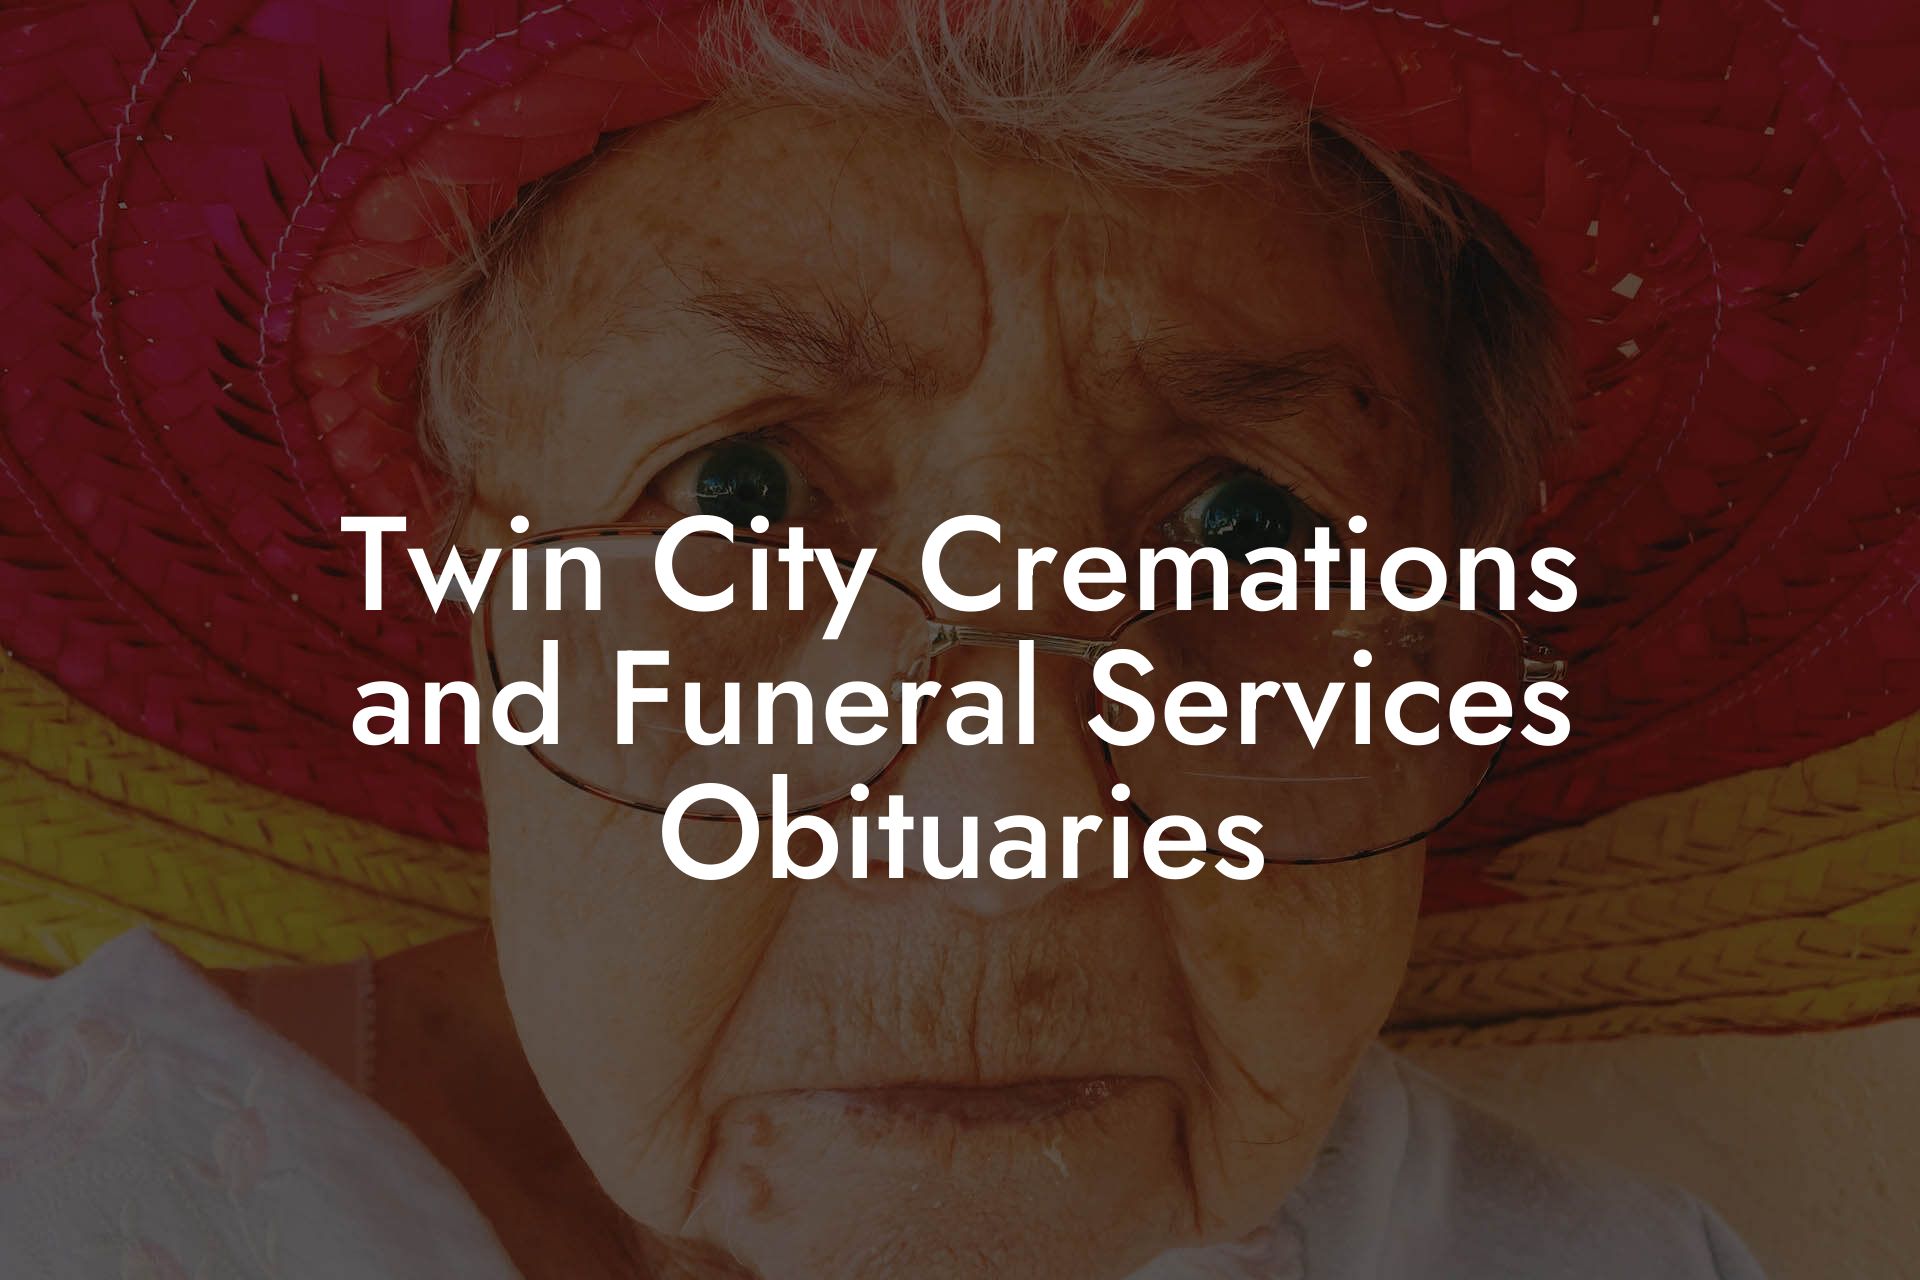 Twin City Cremations and Funeral Services Obituaries